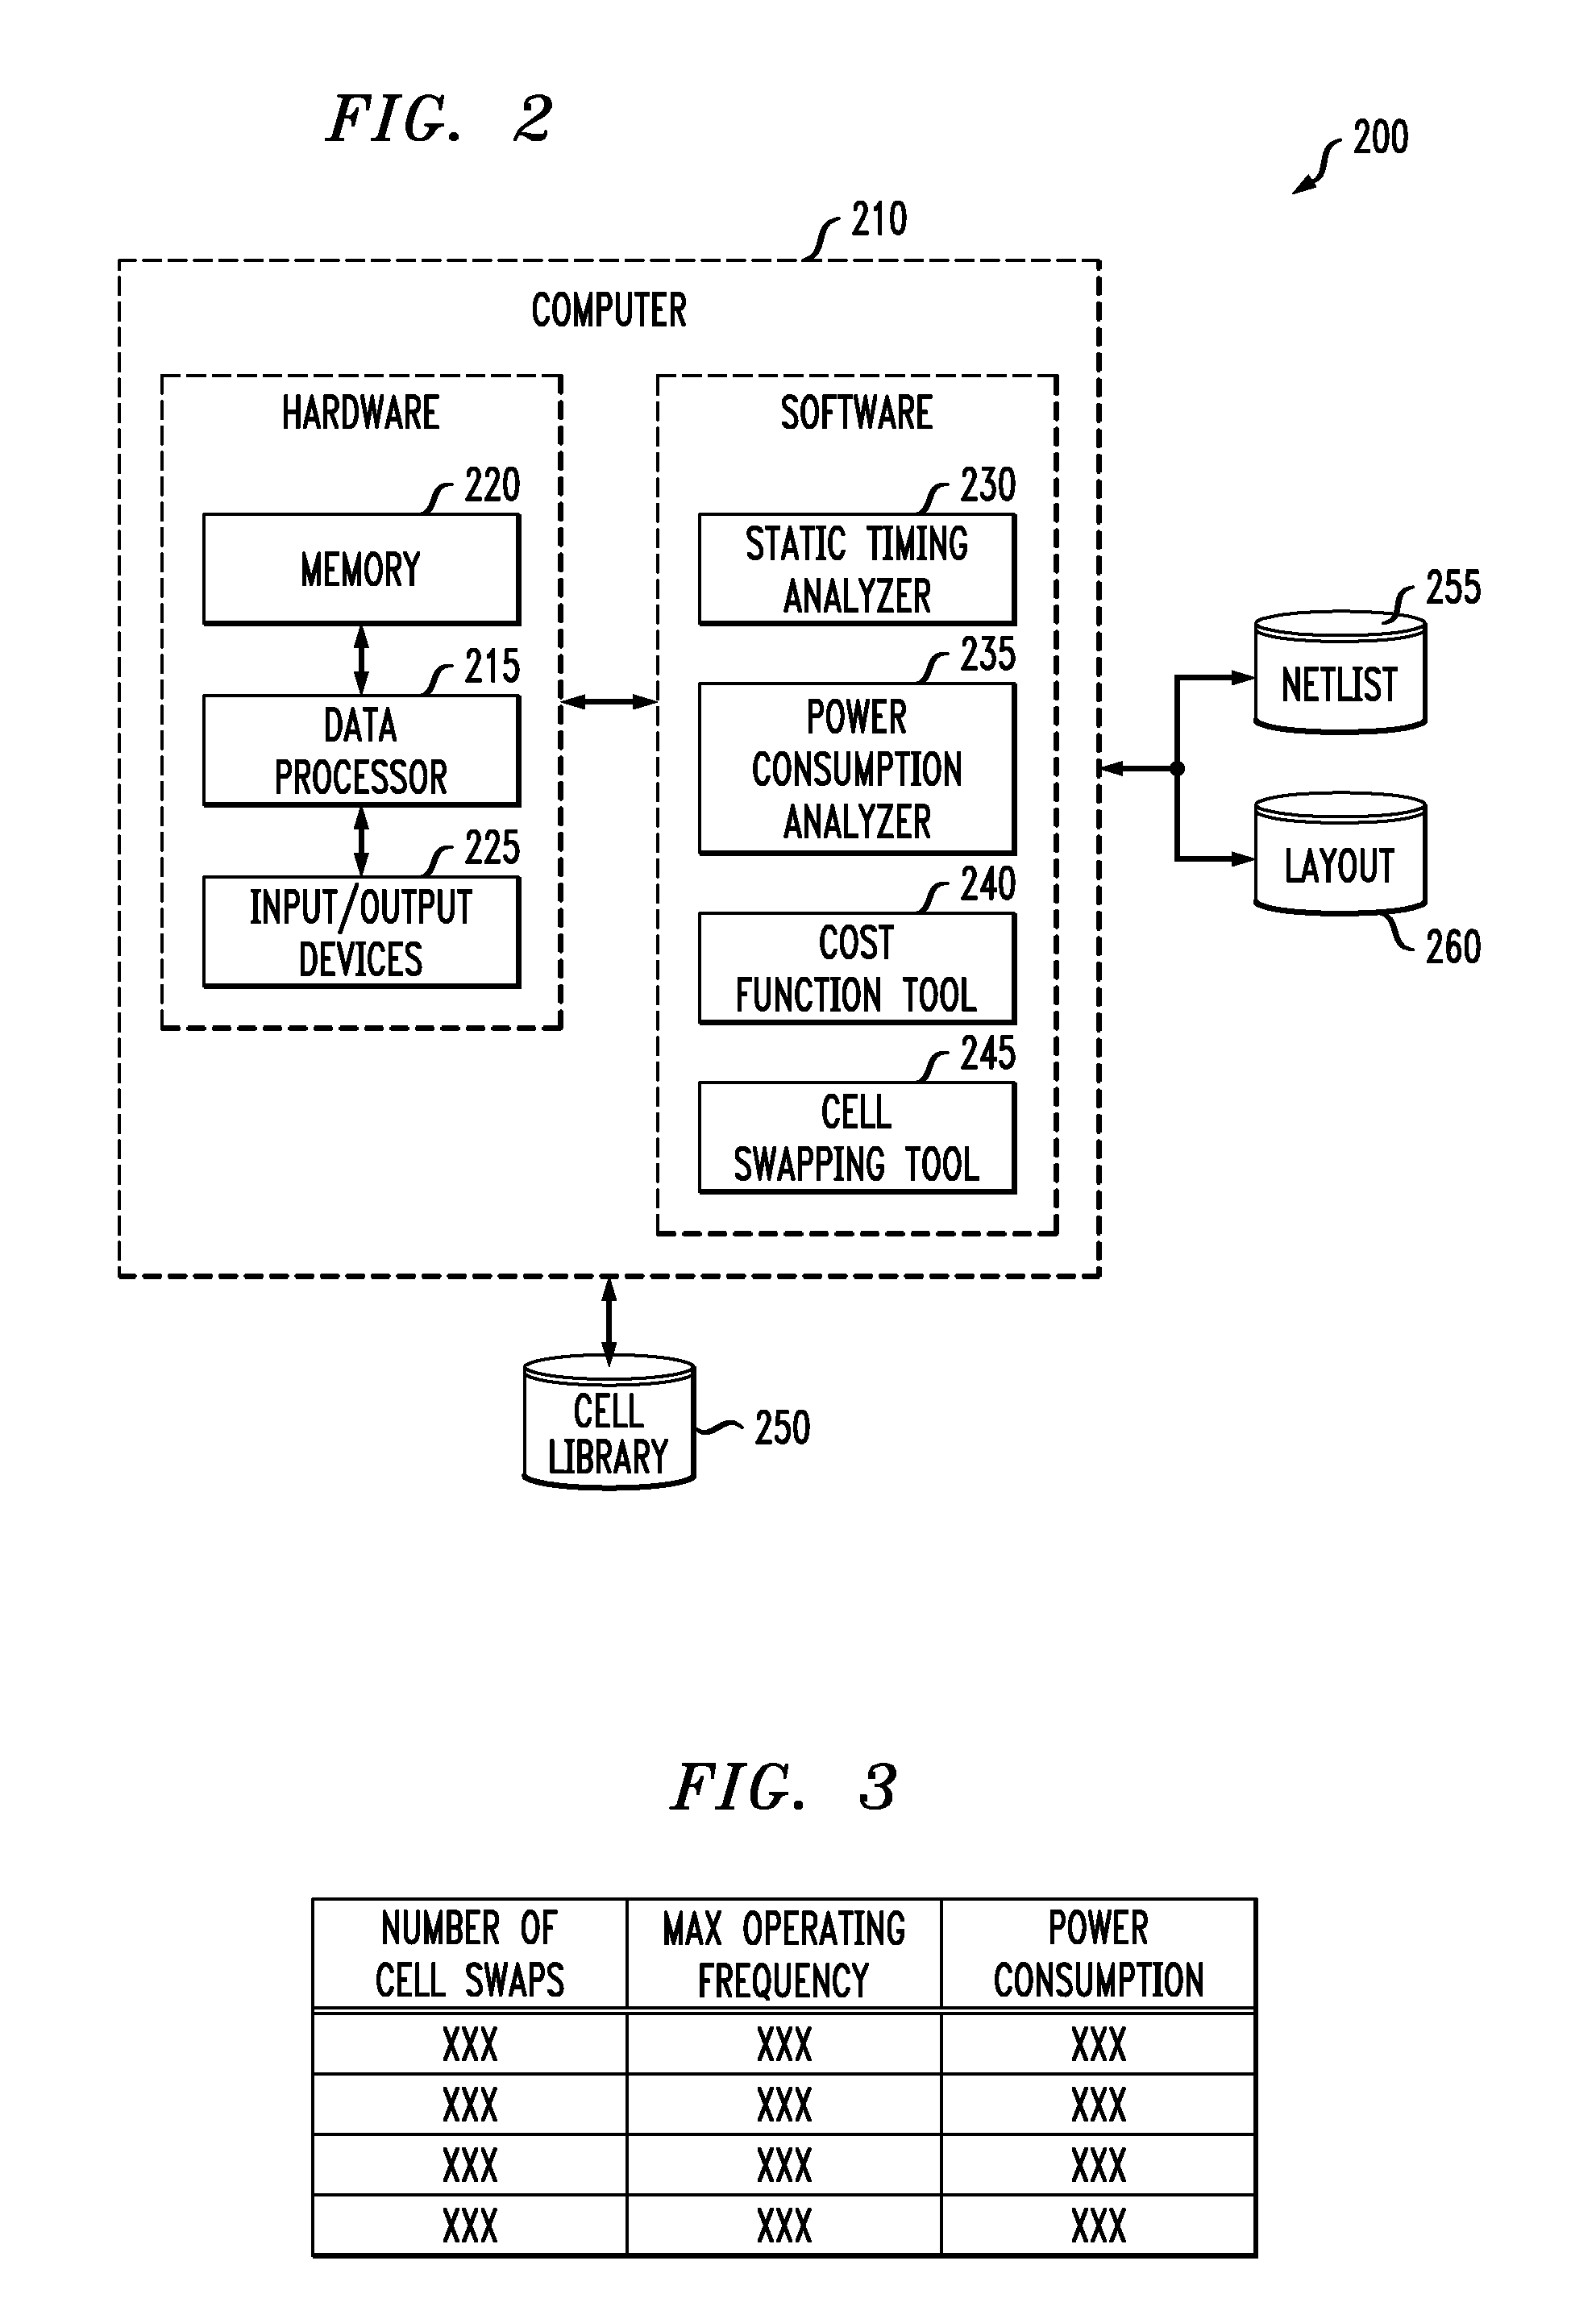 Modifying integrated circuit designs to achieve multiple operating frequency targets